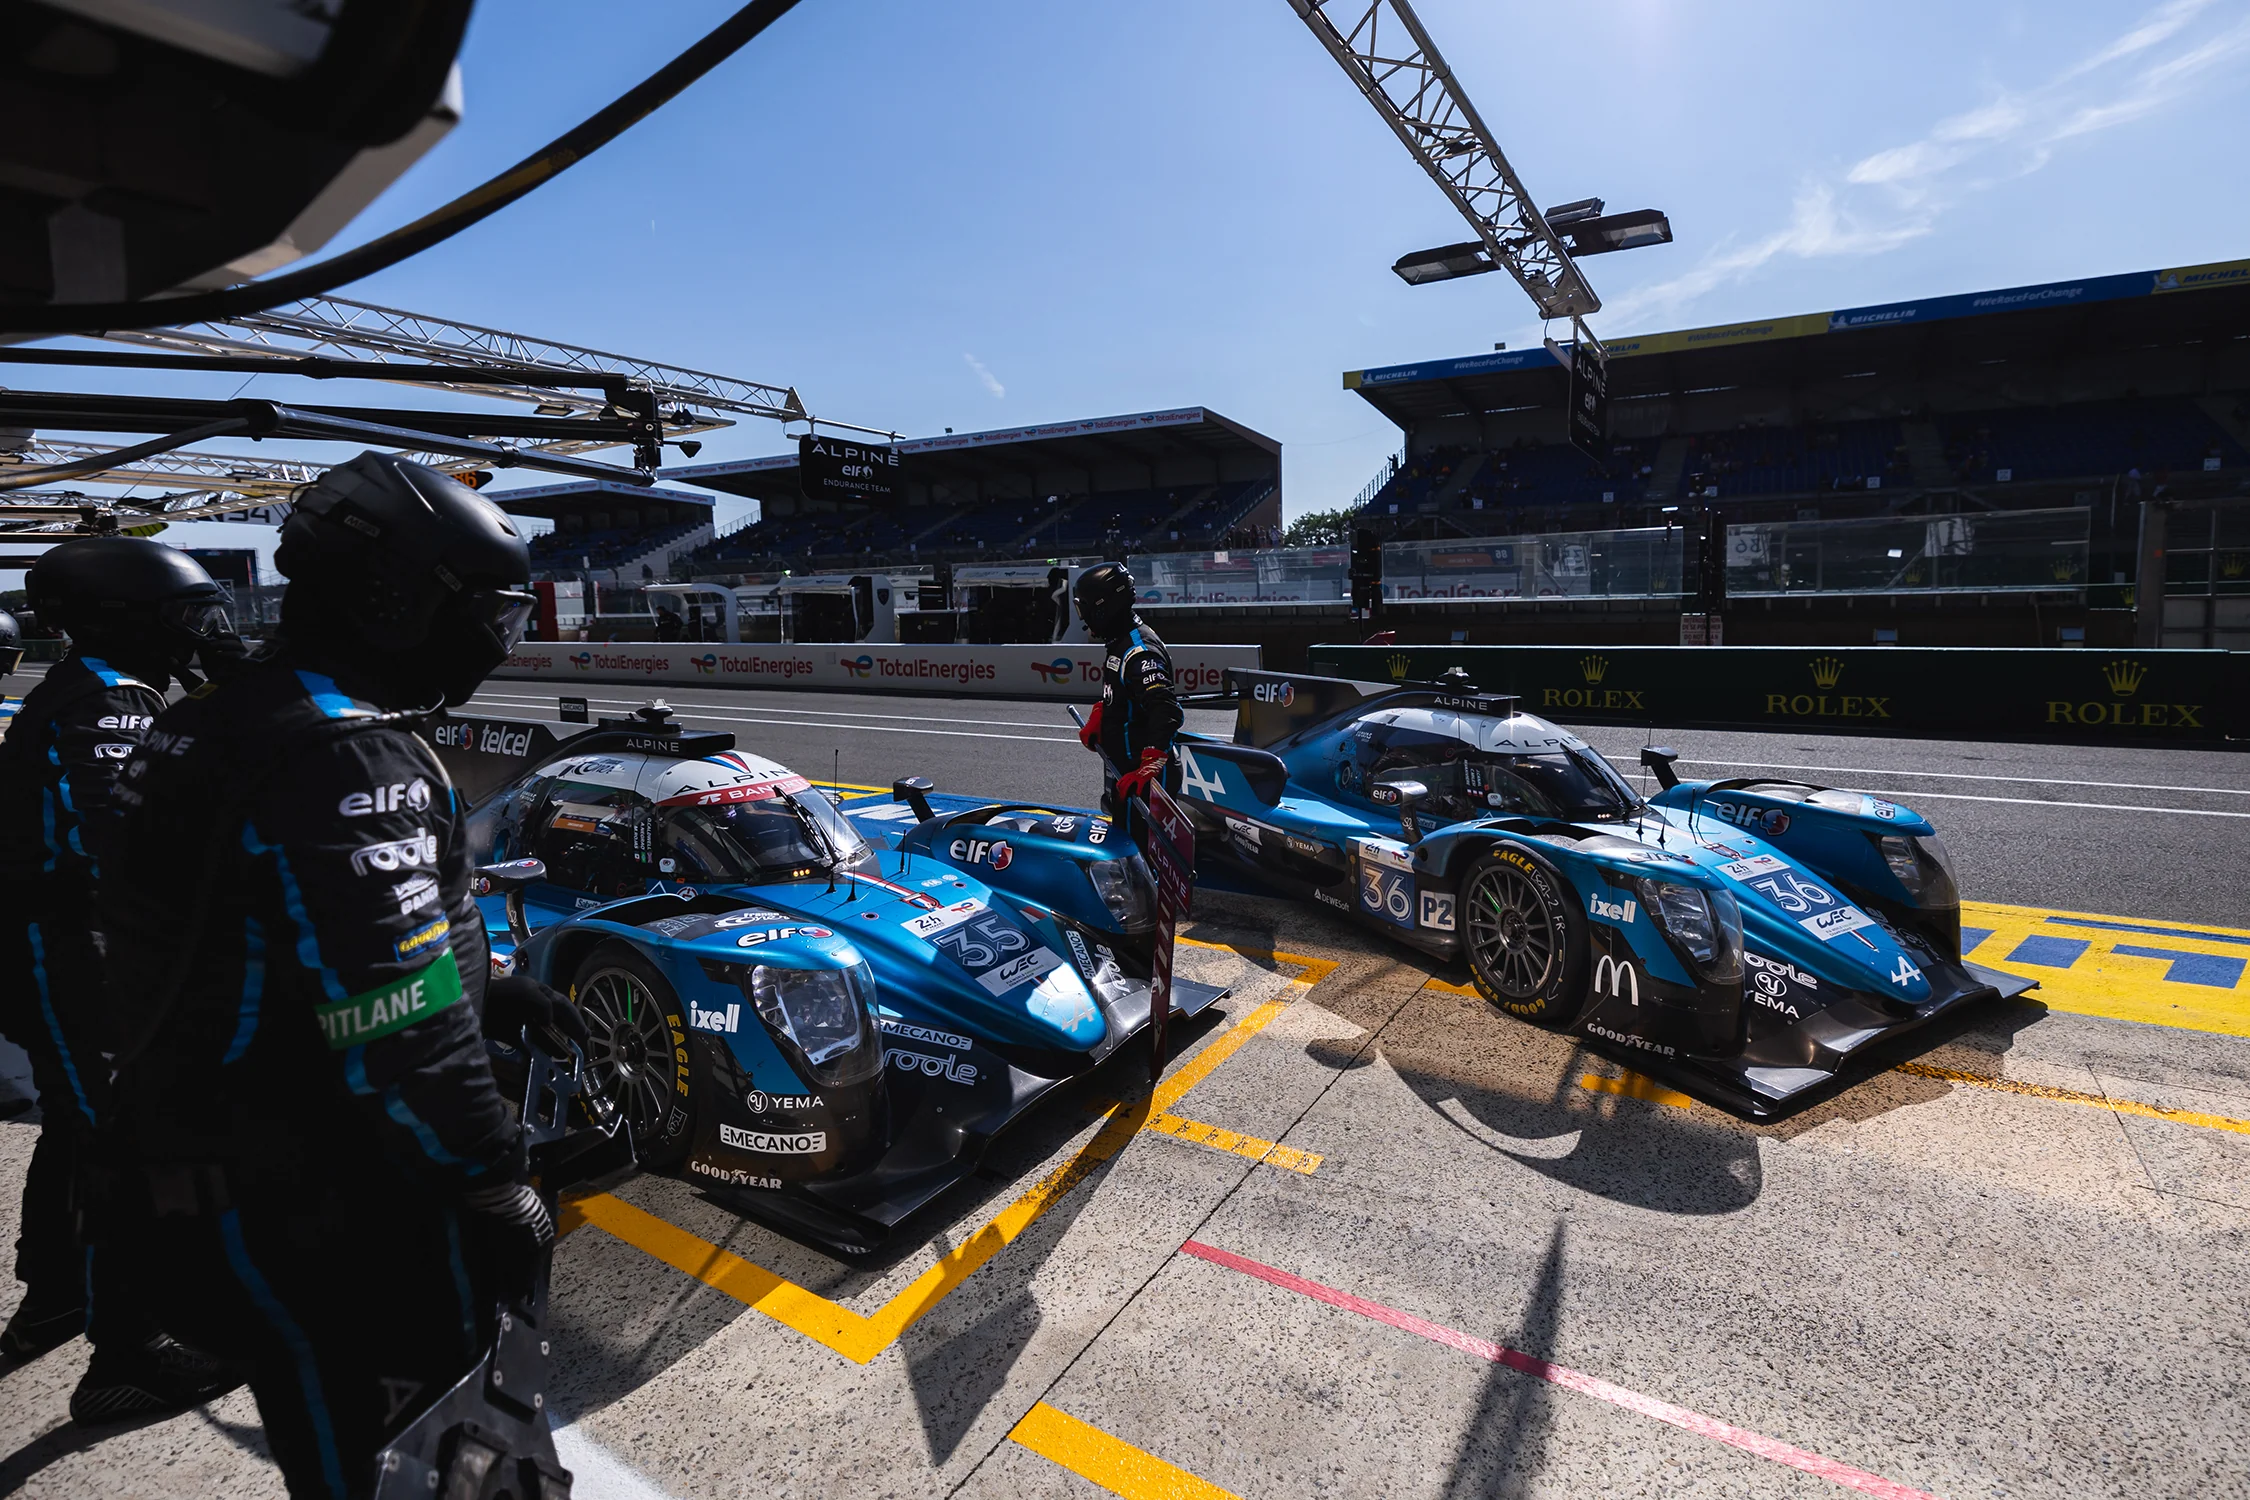 YEMA?s Racing-Inspired Collection Makes Its Way to the WEC Grid with New Alpine Endurance Team Partnership